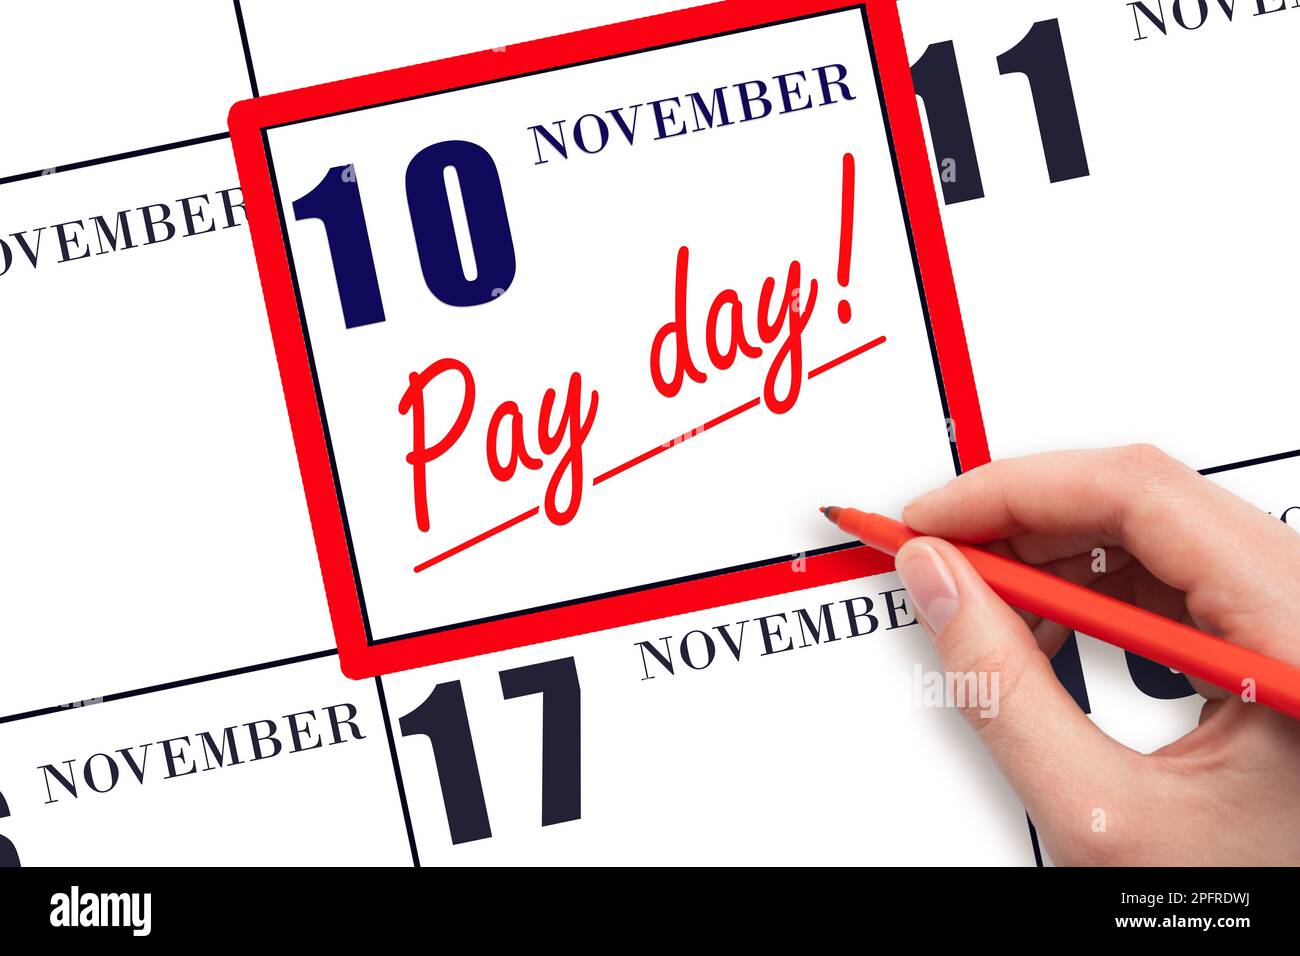 10th day of November. Hand writing text PAY DATE on calendar date November 10 and underline it. Payment due date.  Reminder concept of payment. Autumn Stock Photo